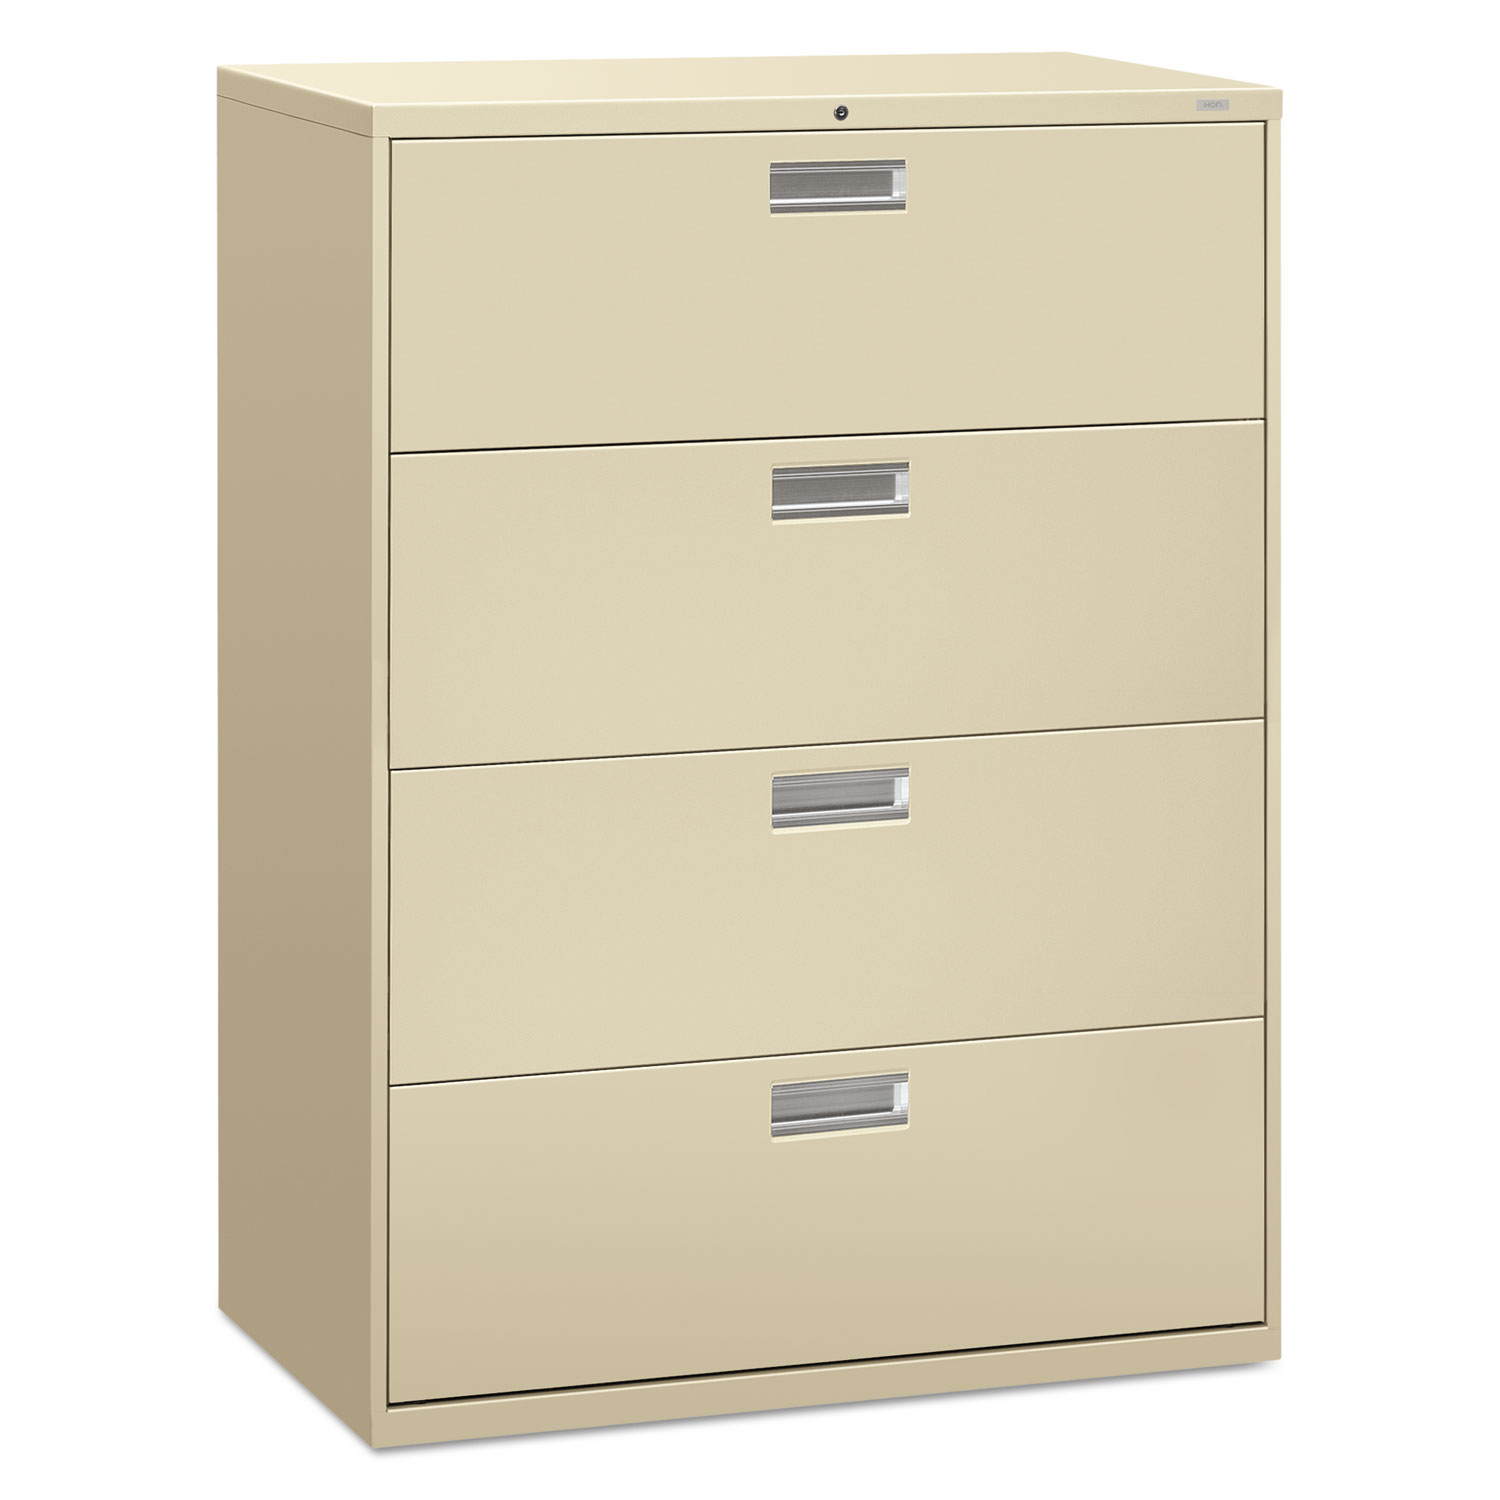 HON 600 Series Four-Drawer Lateral File, 42w x 19-1/4d, Putty